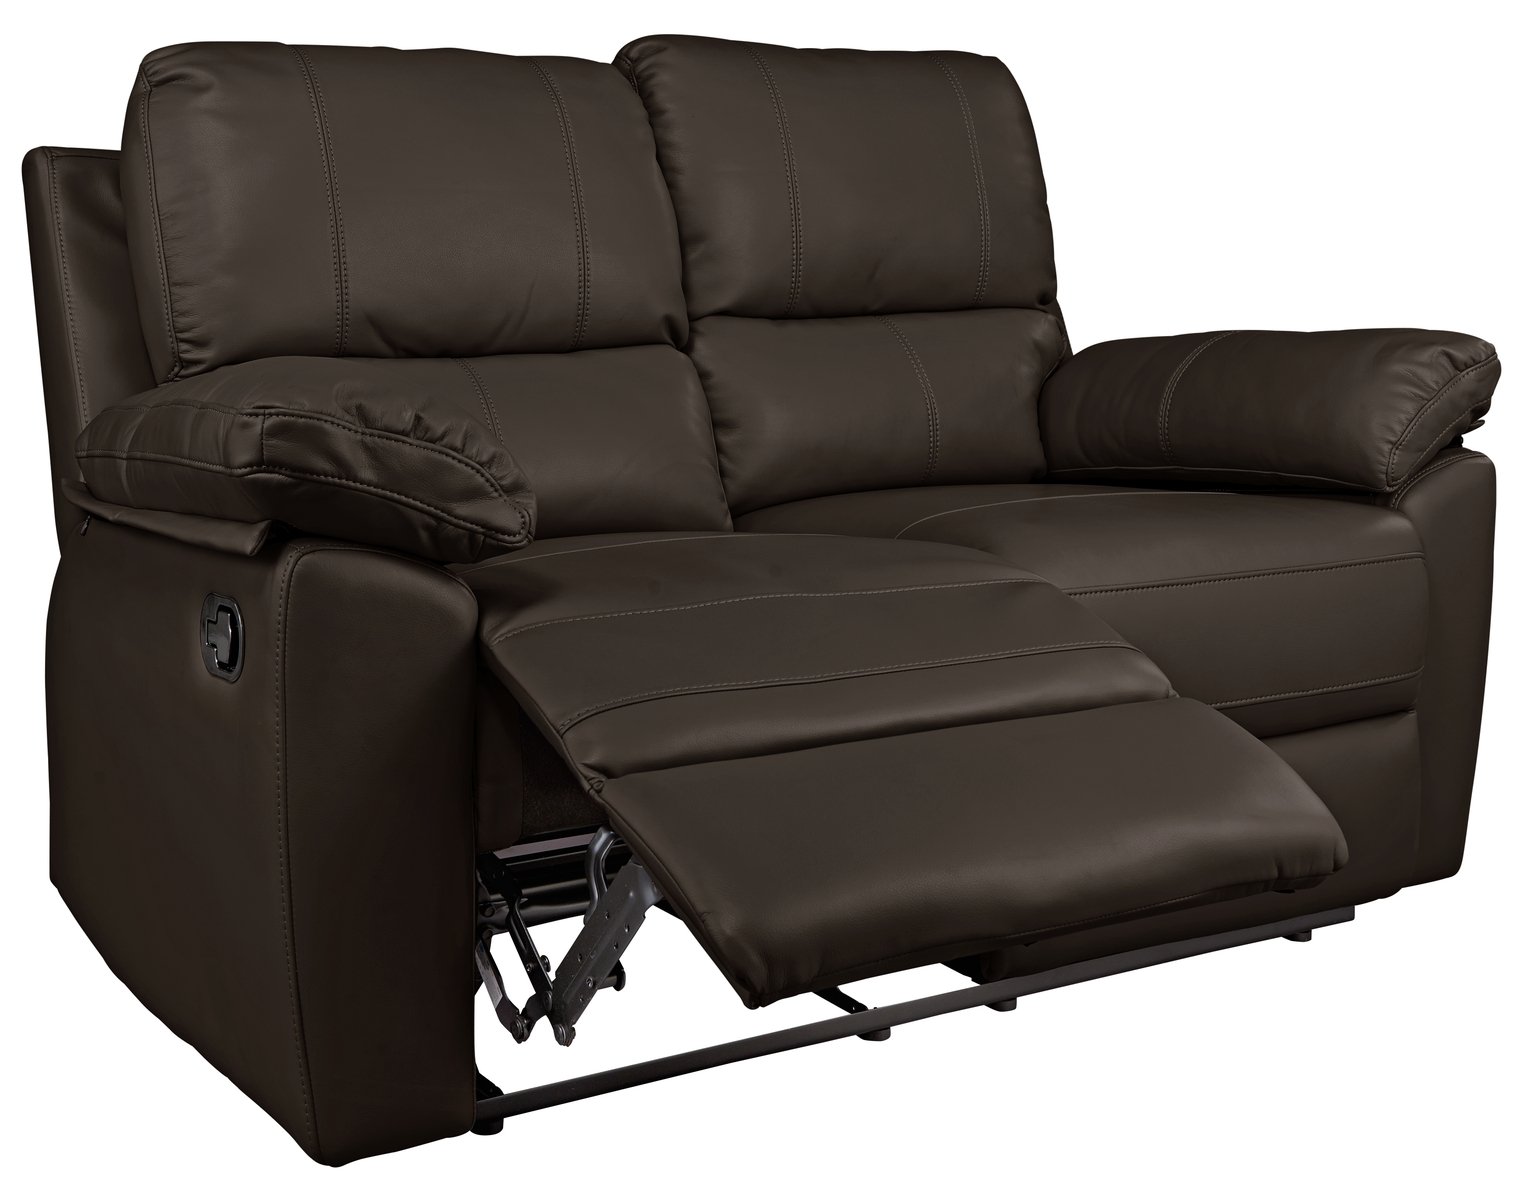 Argos Home Toby Faux Leather 2 Seater Recliner Sofa - Brown